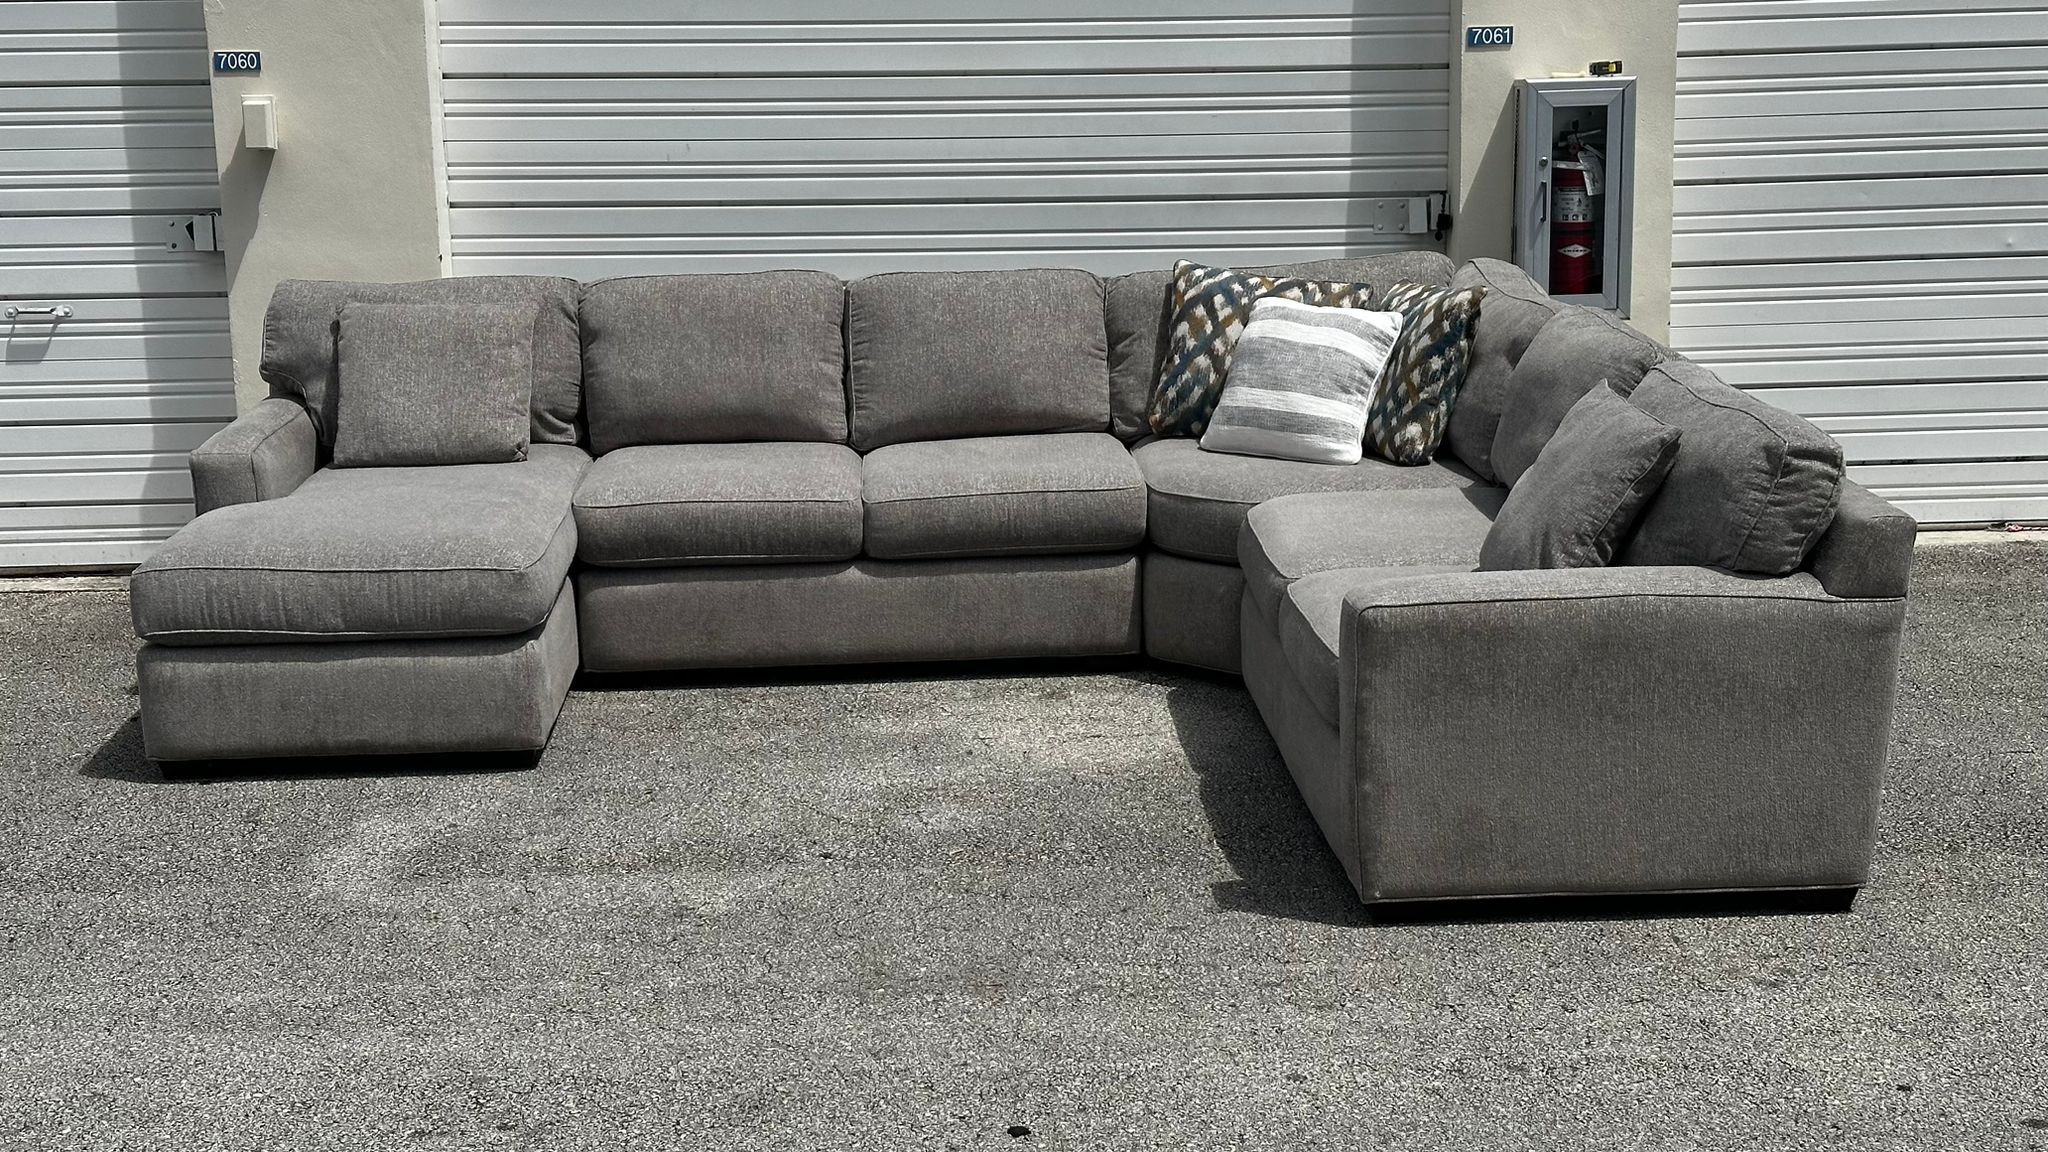 GRAY SECTIONAL SOFA W CHAISE by H.M. RICHARDS - delivery is negotiable